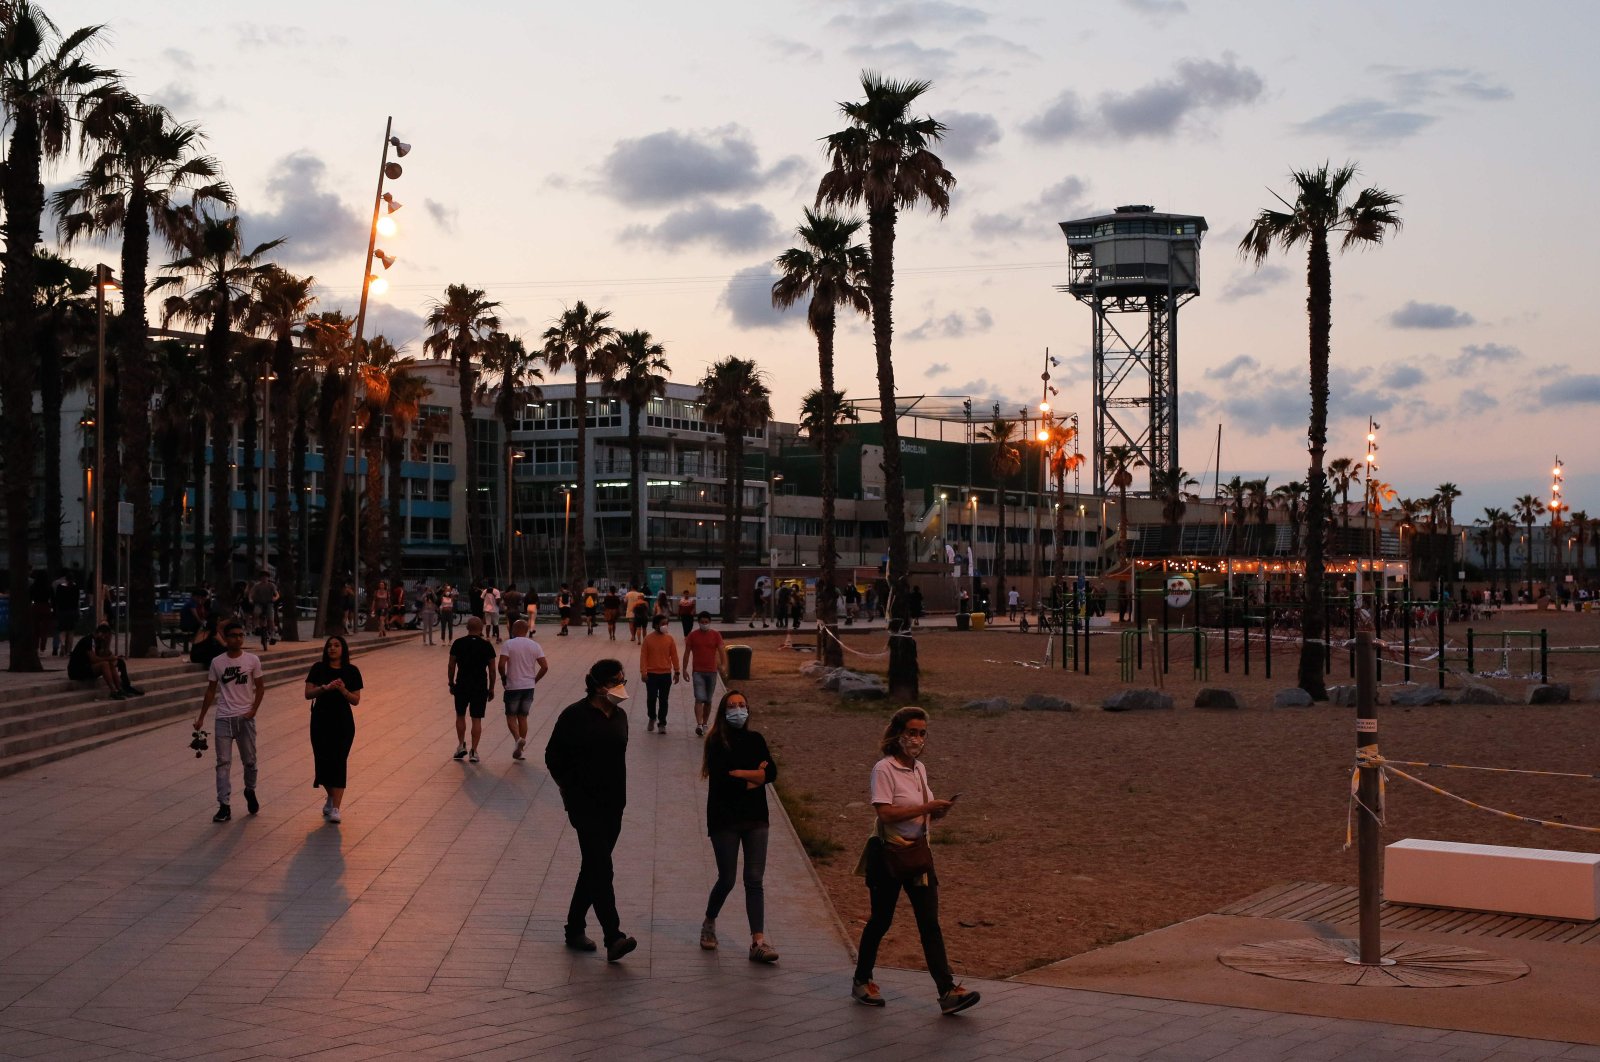 People stroll along Barceloneta Beach in Barcelona on May 30, 2020 amid a national lockdown to prevent the spread of the novel coronavirus. (AFP Photo)